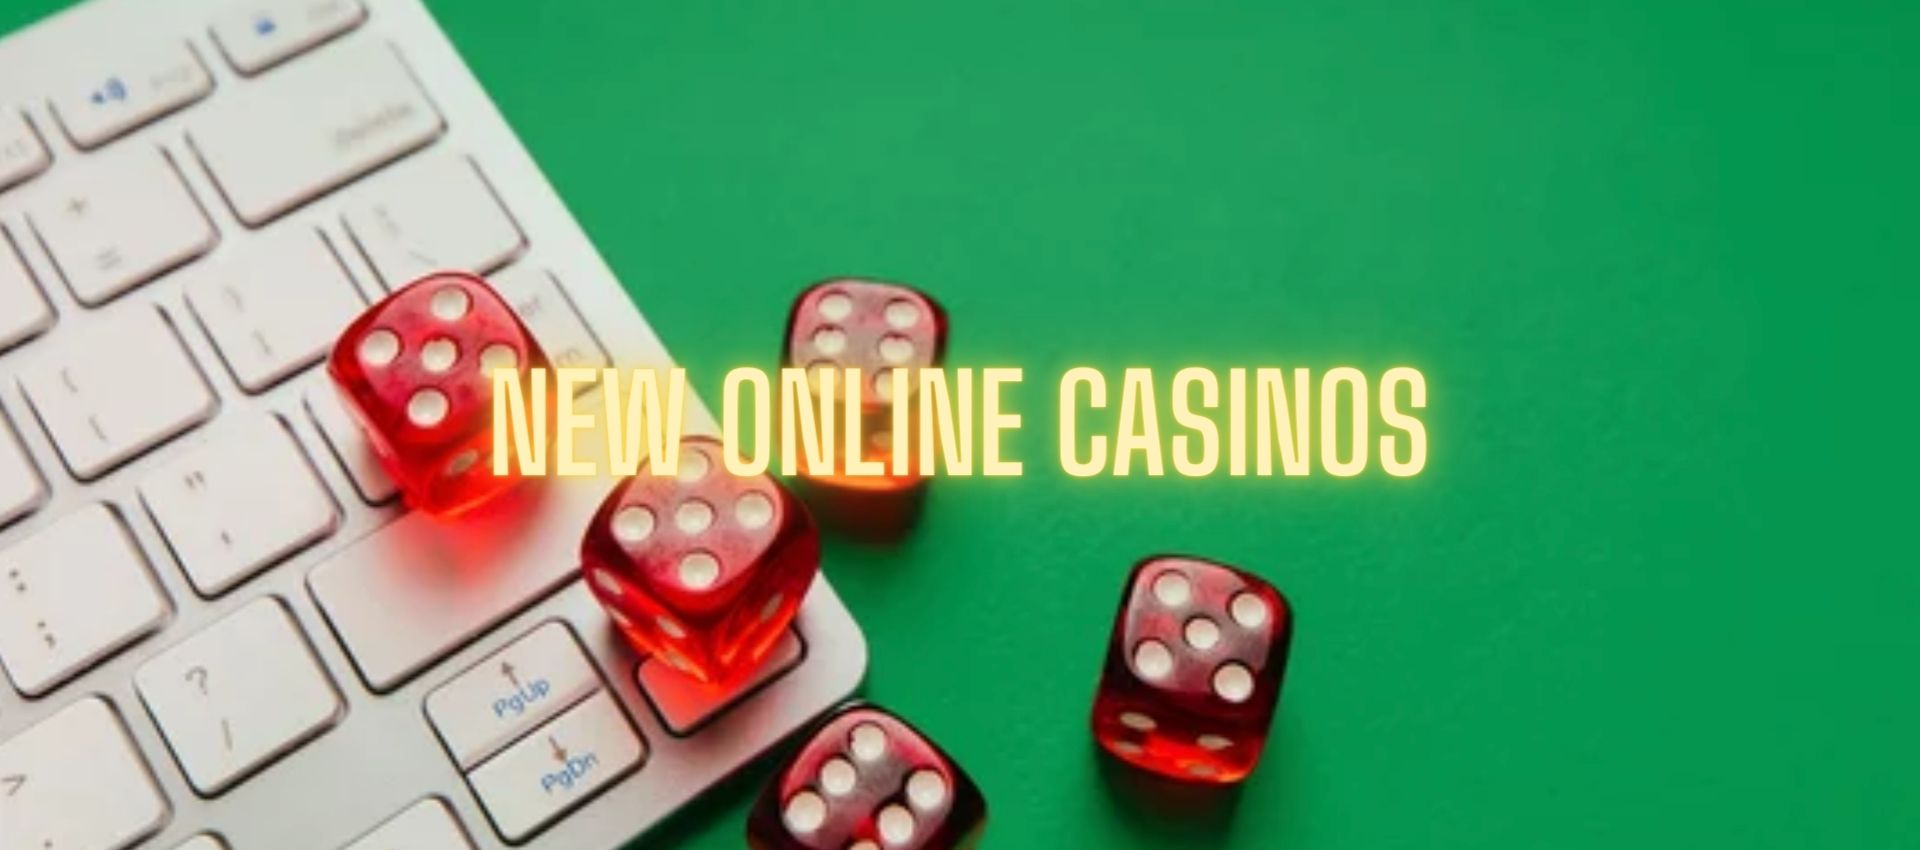 New online casino list in India